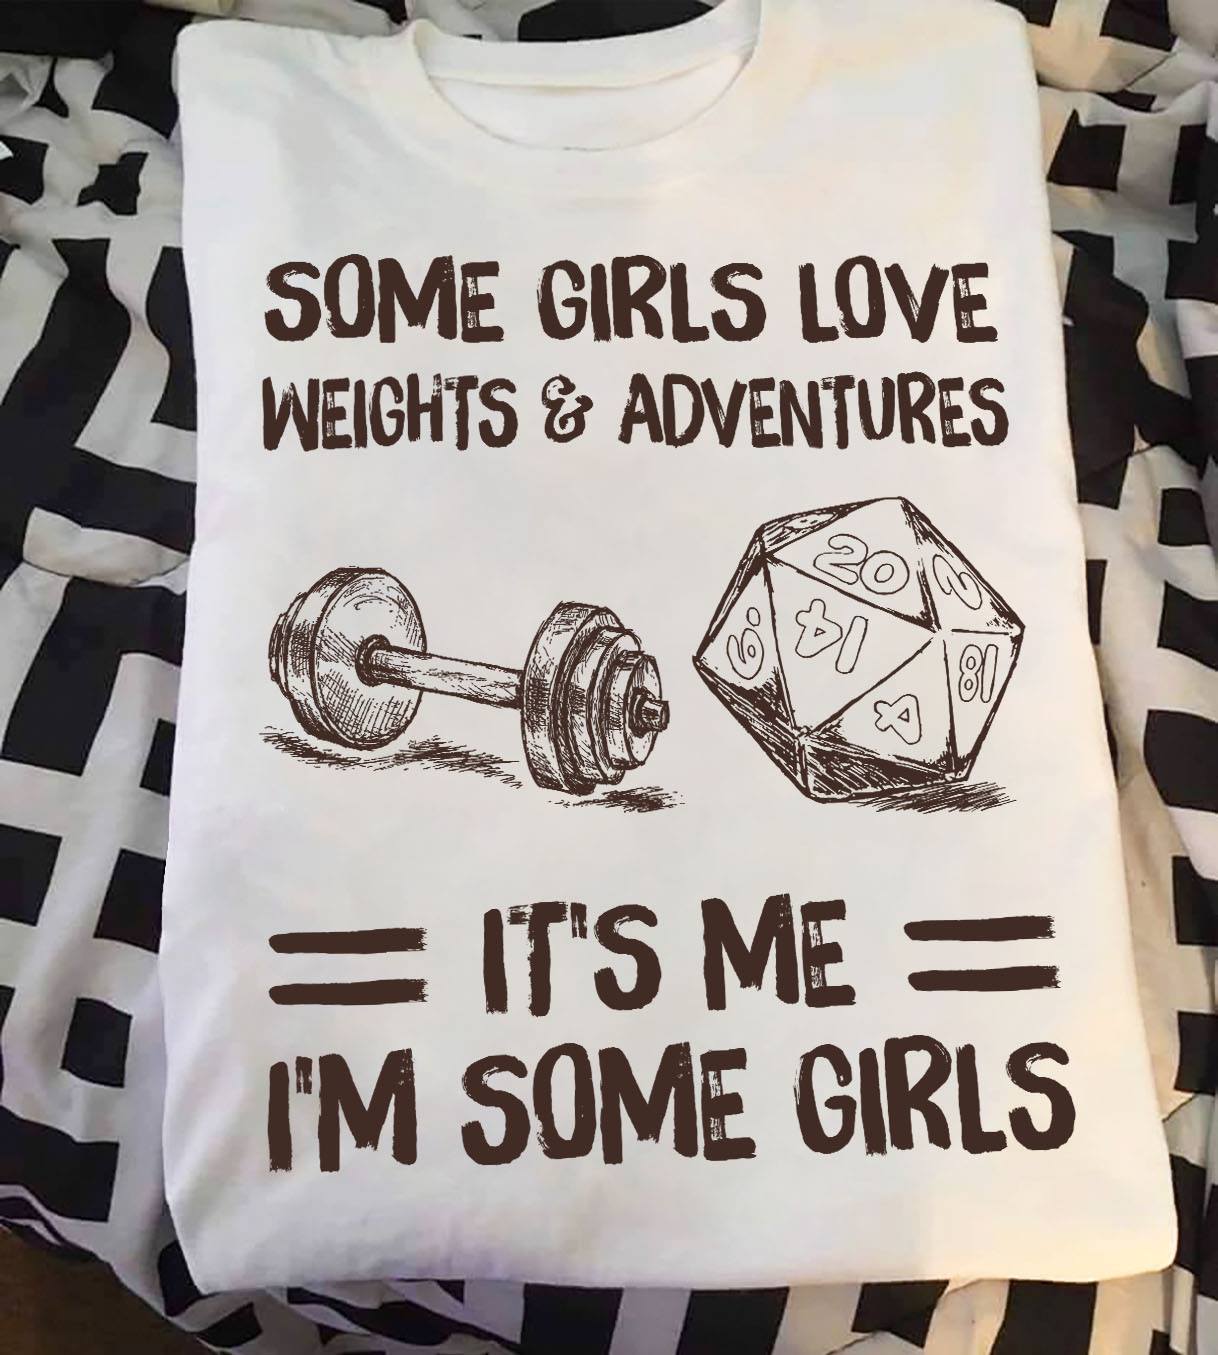 Some girls love weights and adventures